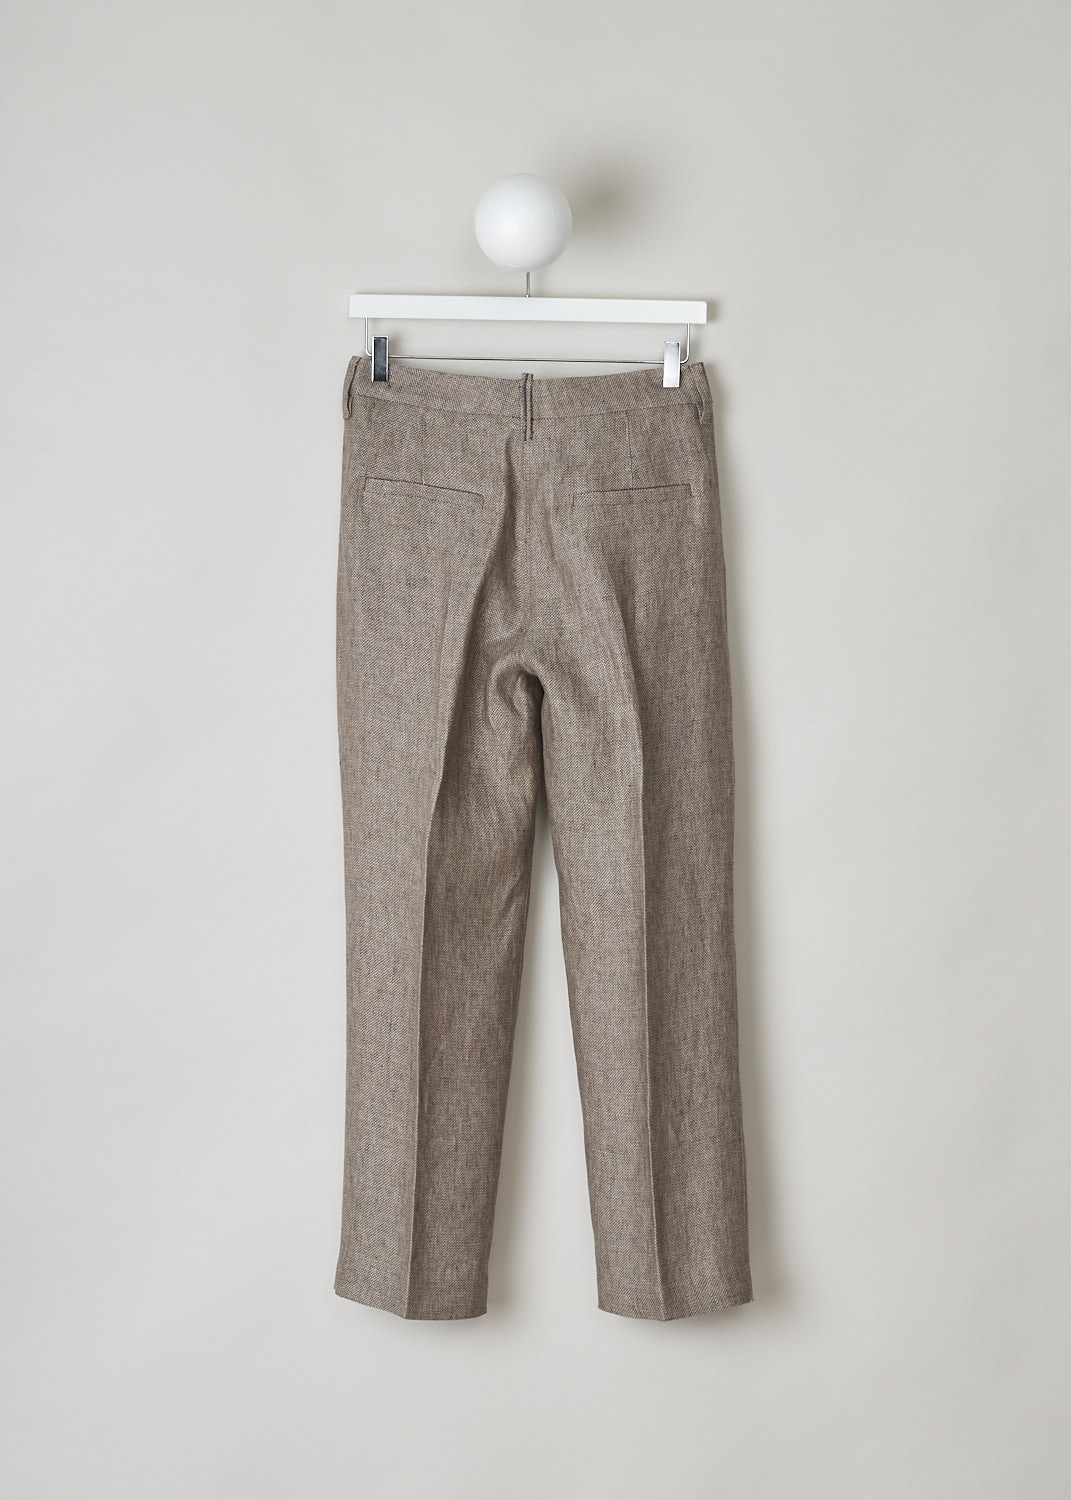 BRUNELLO CUCINELLI, BROWN LINEN PANTS, MH199P7957_C001, Beige, Brown, Back, These brown linen pants have a waistband with belt loops. A concealed hook and zipper function as the closure option. The straight pant legs have pressed centre creases. The pants have forward slanted in the front and welt pockets in the back. 

